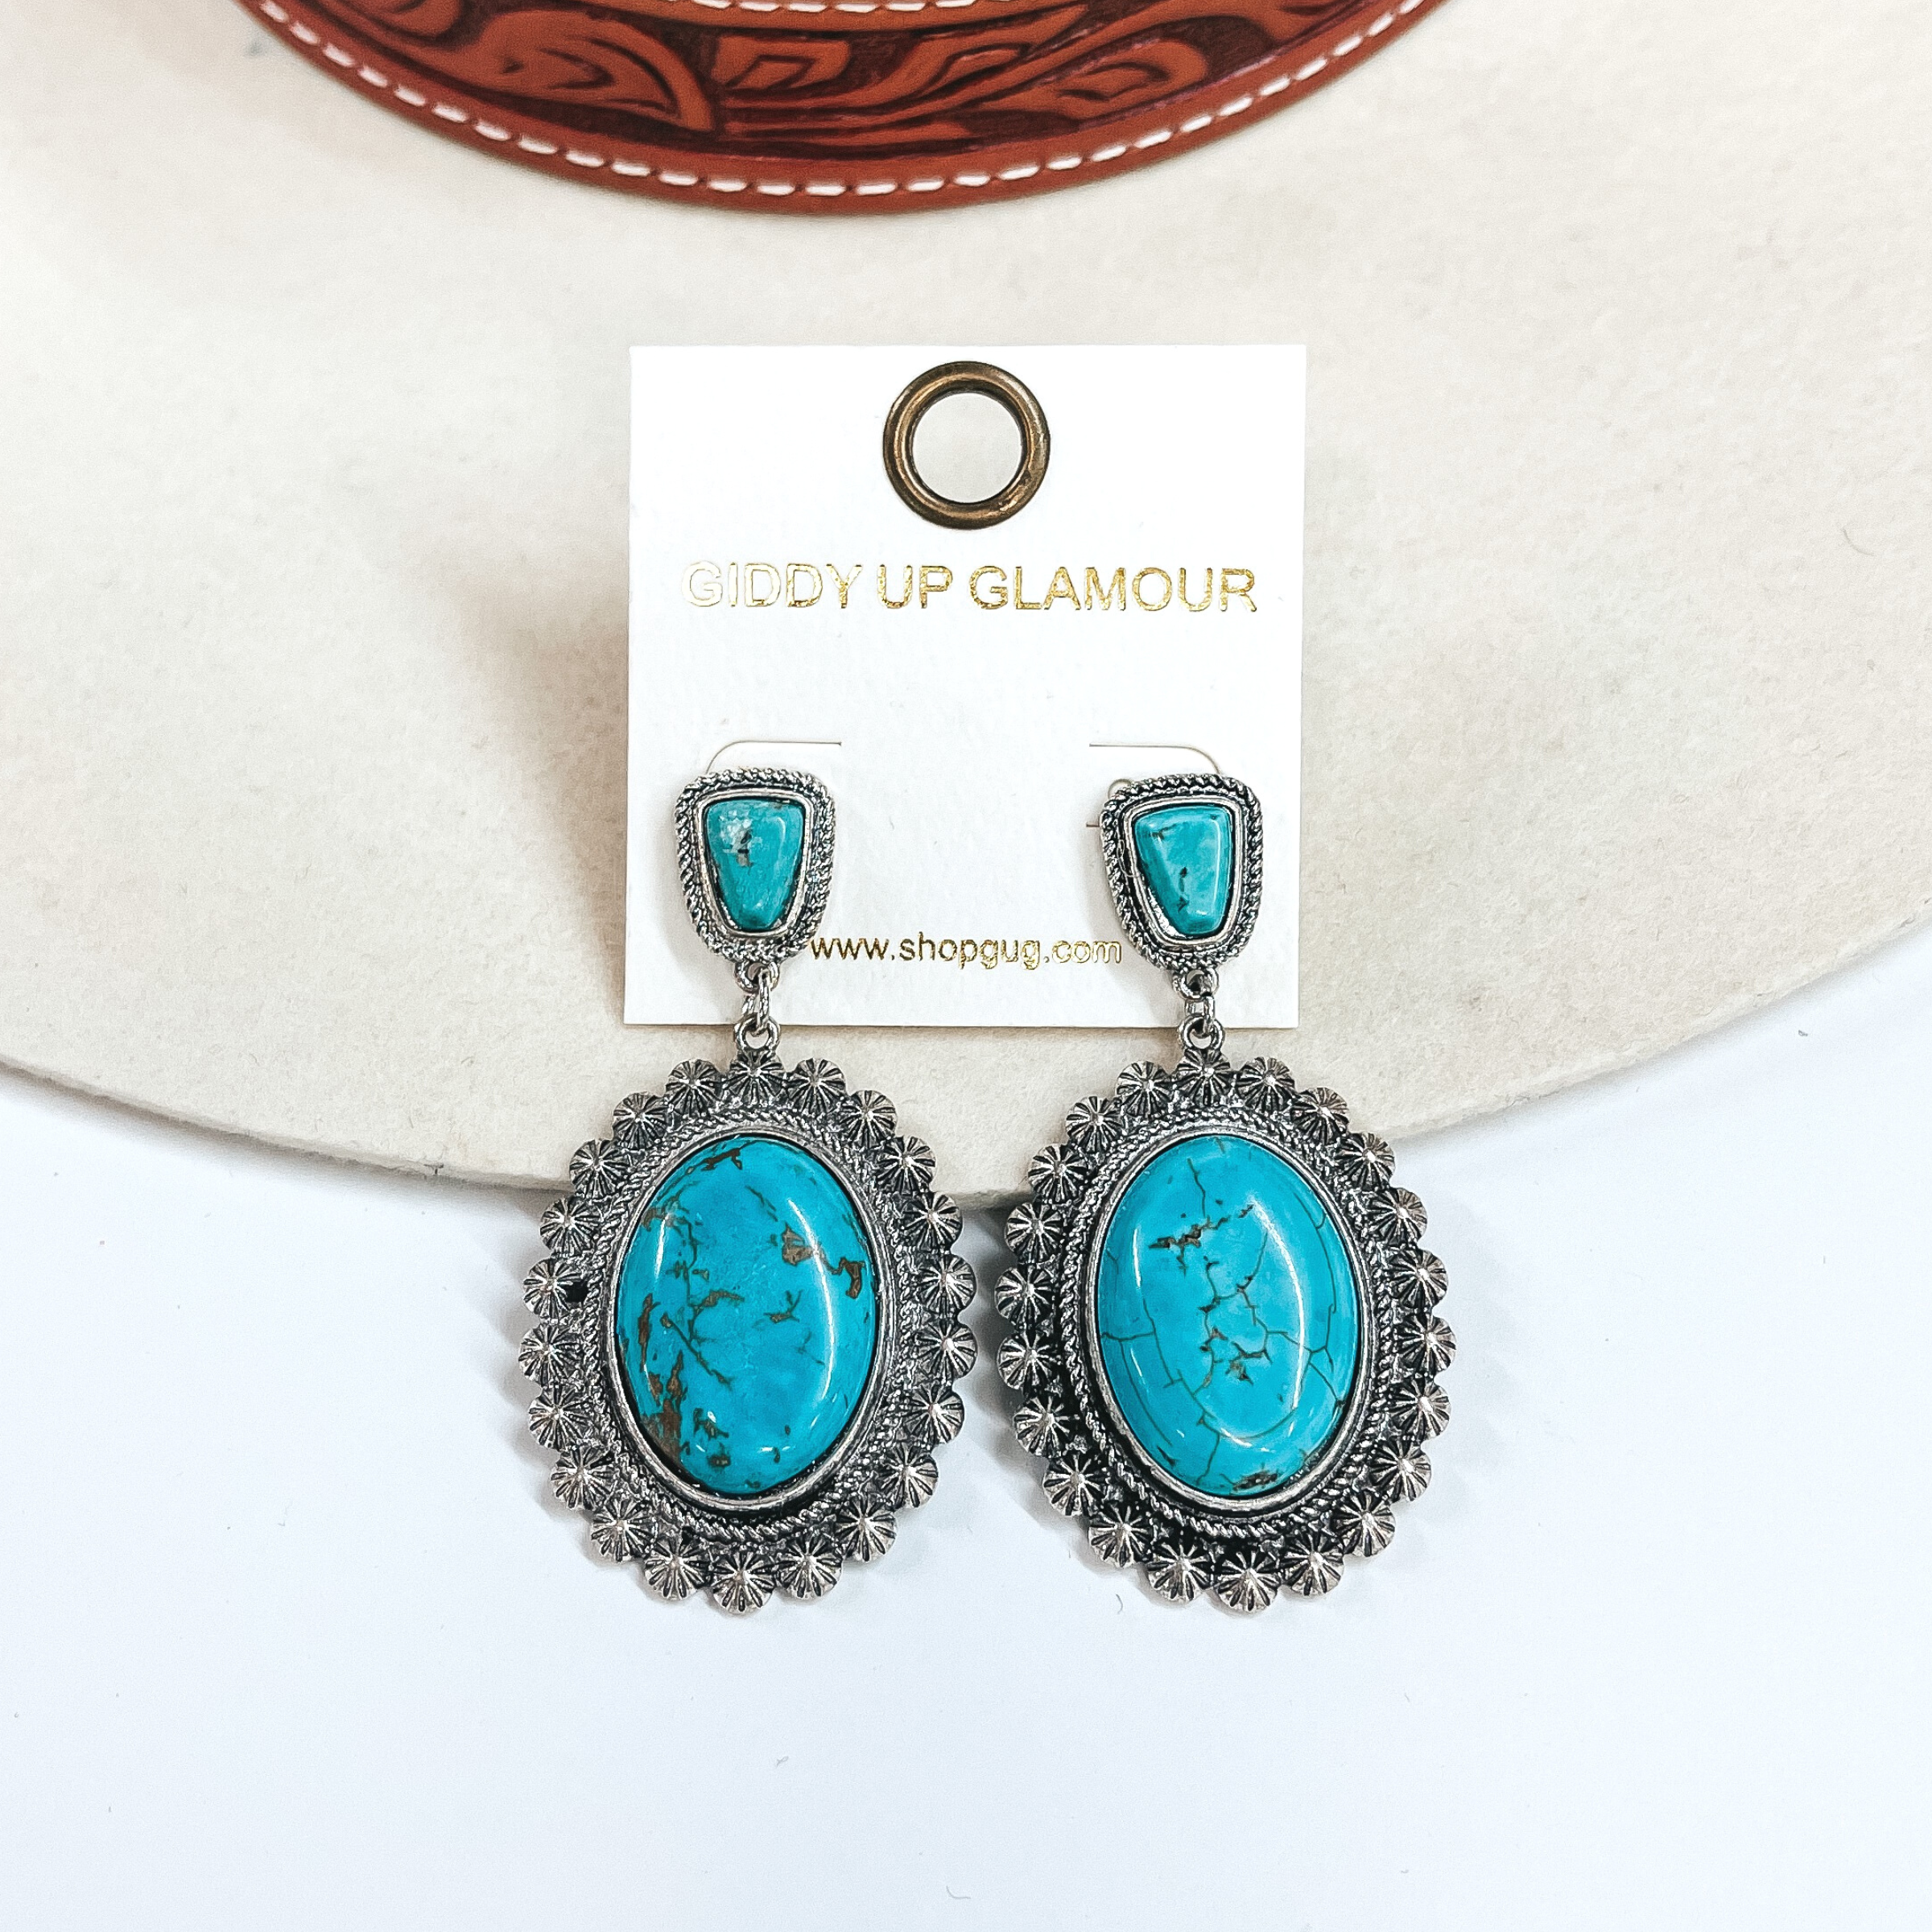 These are western silver post earrings with  faux turquoise stones. It has a small stone in a  silver textured setting and an oval drop, the oval  drop has a large oval turquoise stone in a silver western textured setting. These earrings are taken  on an ivory felt hat and a white background.